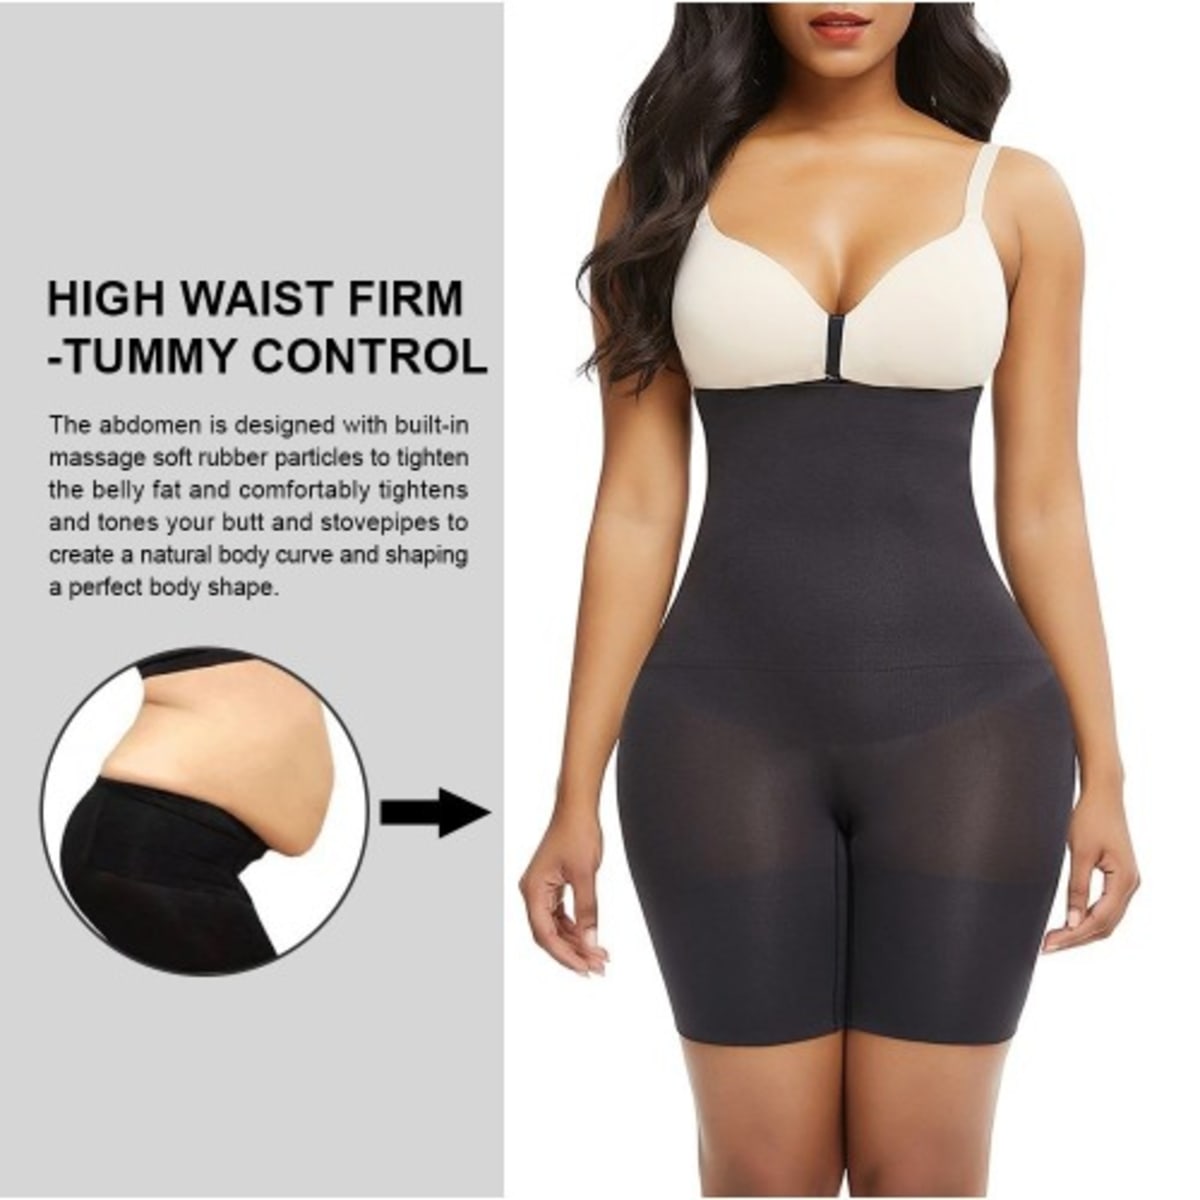 FIRM TUMMY CONTROL HIGH WAISTED BODY SHAPER SLIMMING PANTS